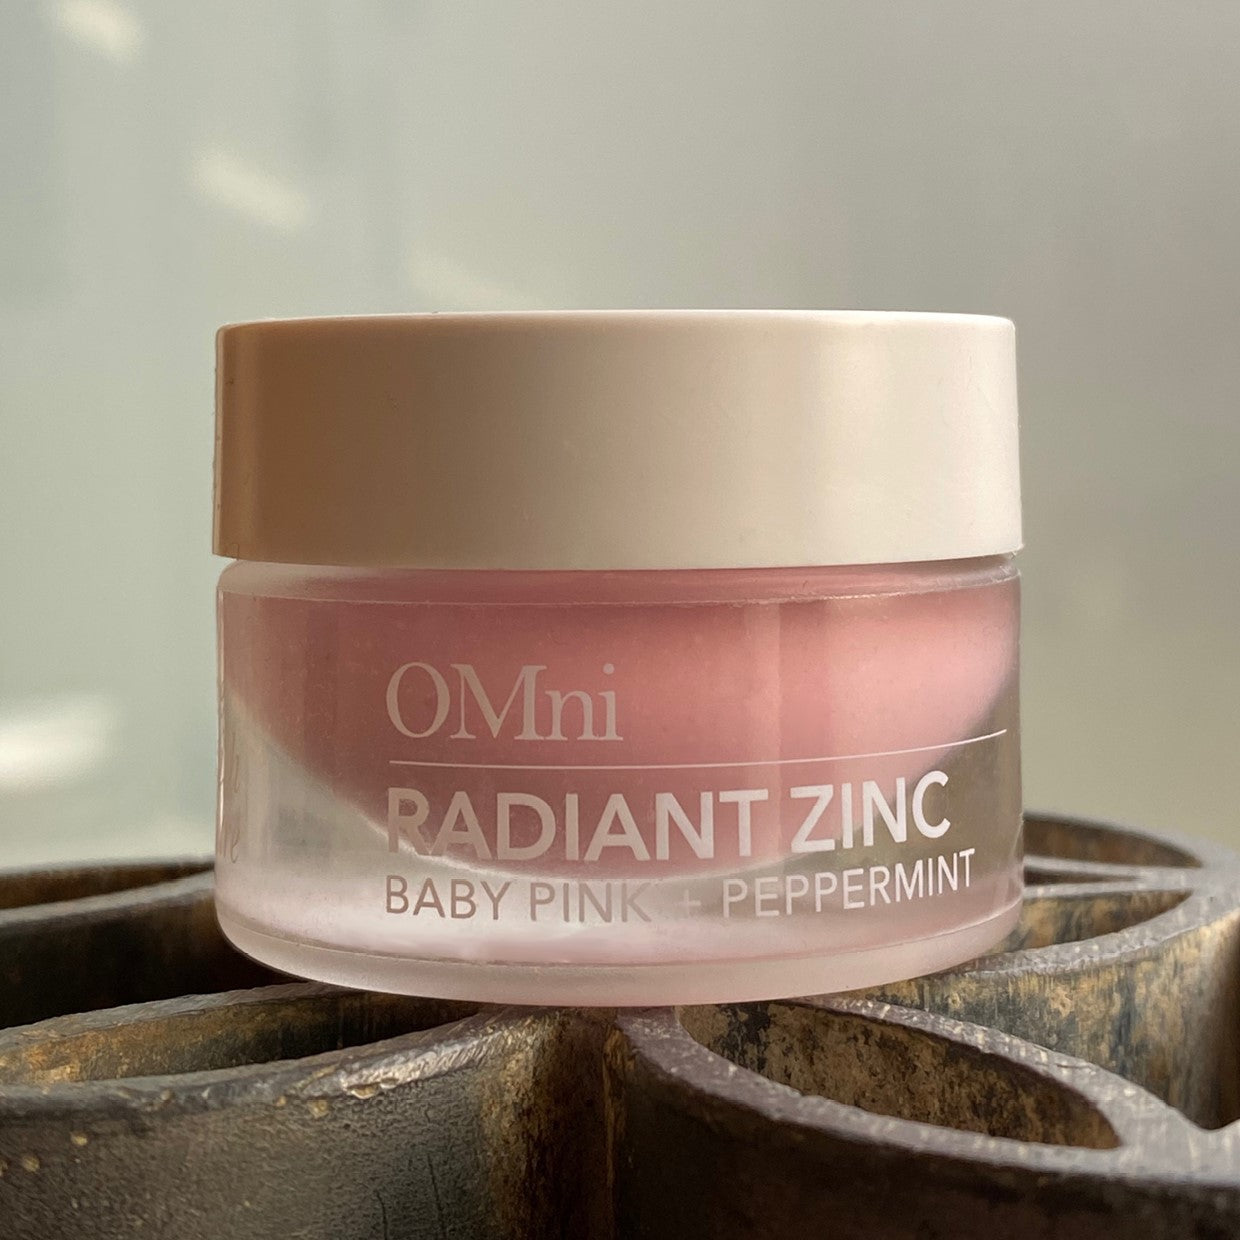 OMni Radiant Zinc Baby Pink natural multi-use balm for dry lips and skin, highlighter on cheeks #2